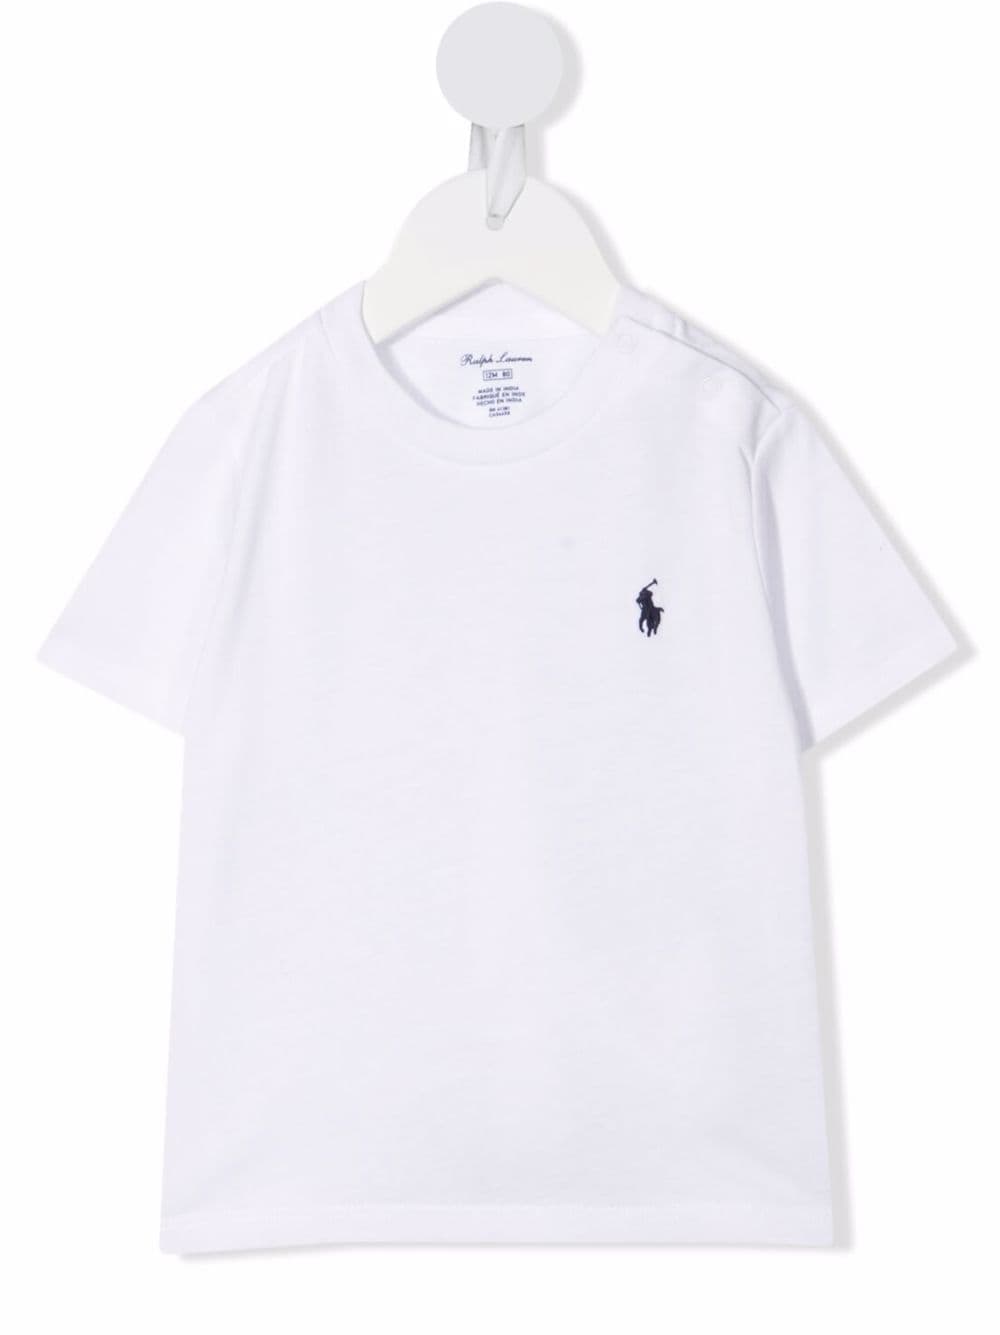 Polo Pony logo cotton T-shirt<BR/><BR/><BR/><BR/><BR/><BR/>